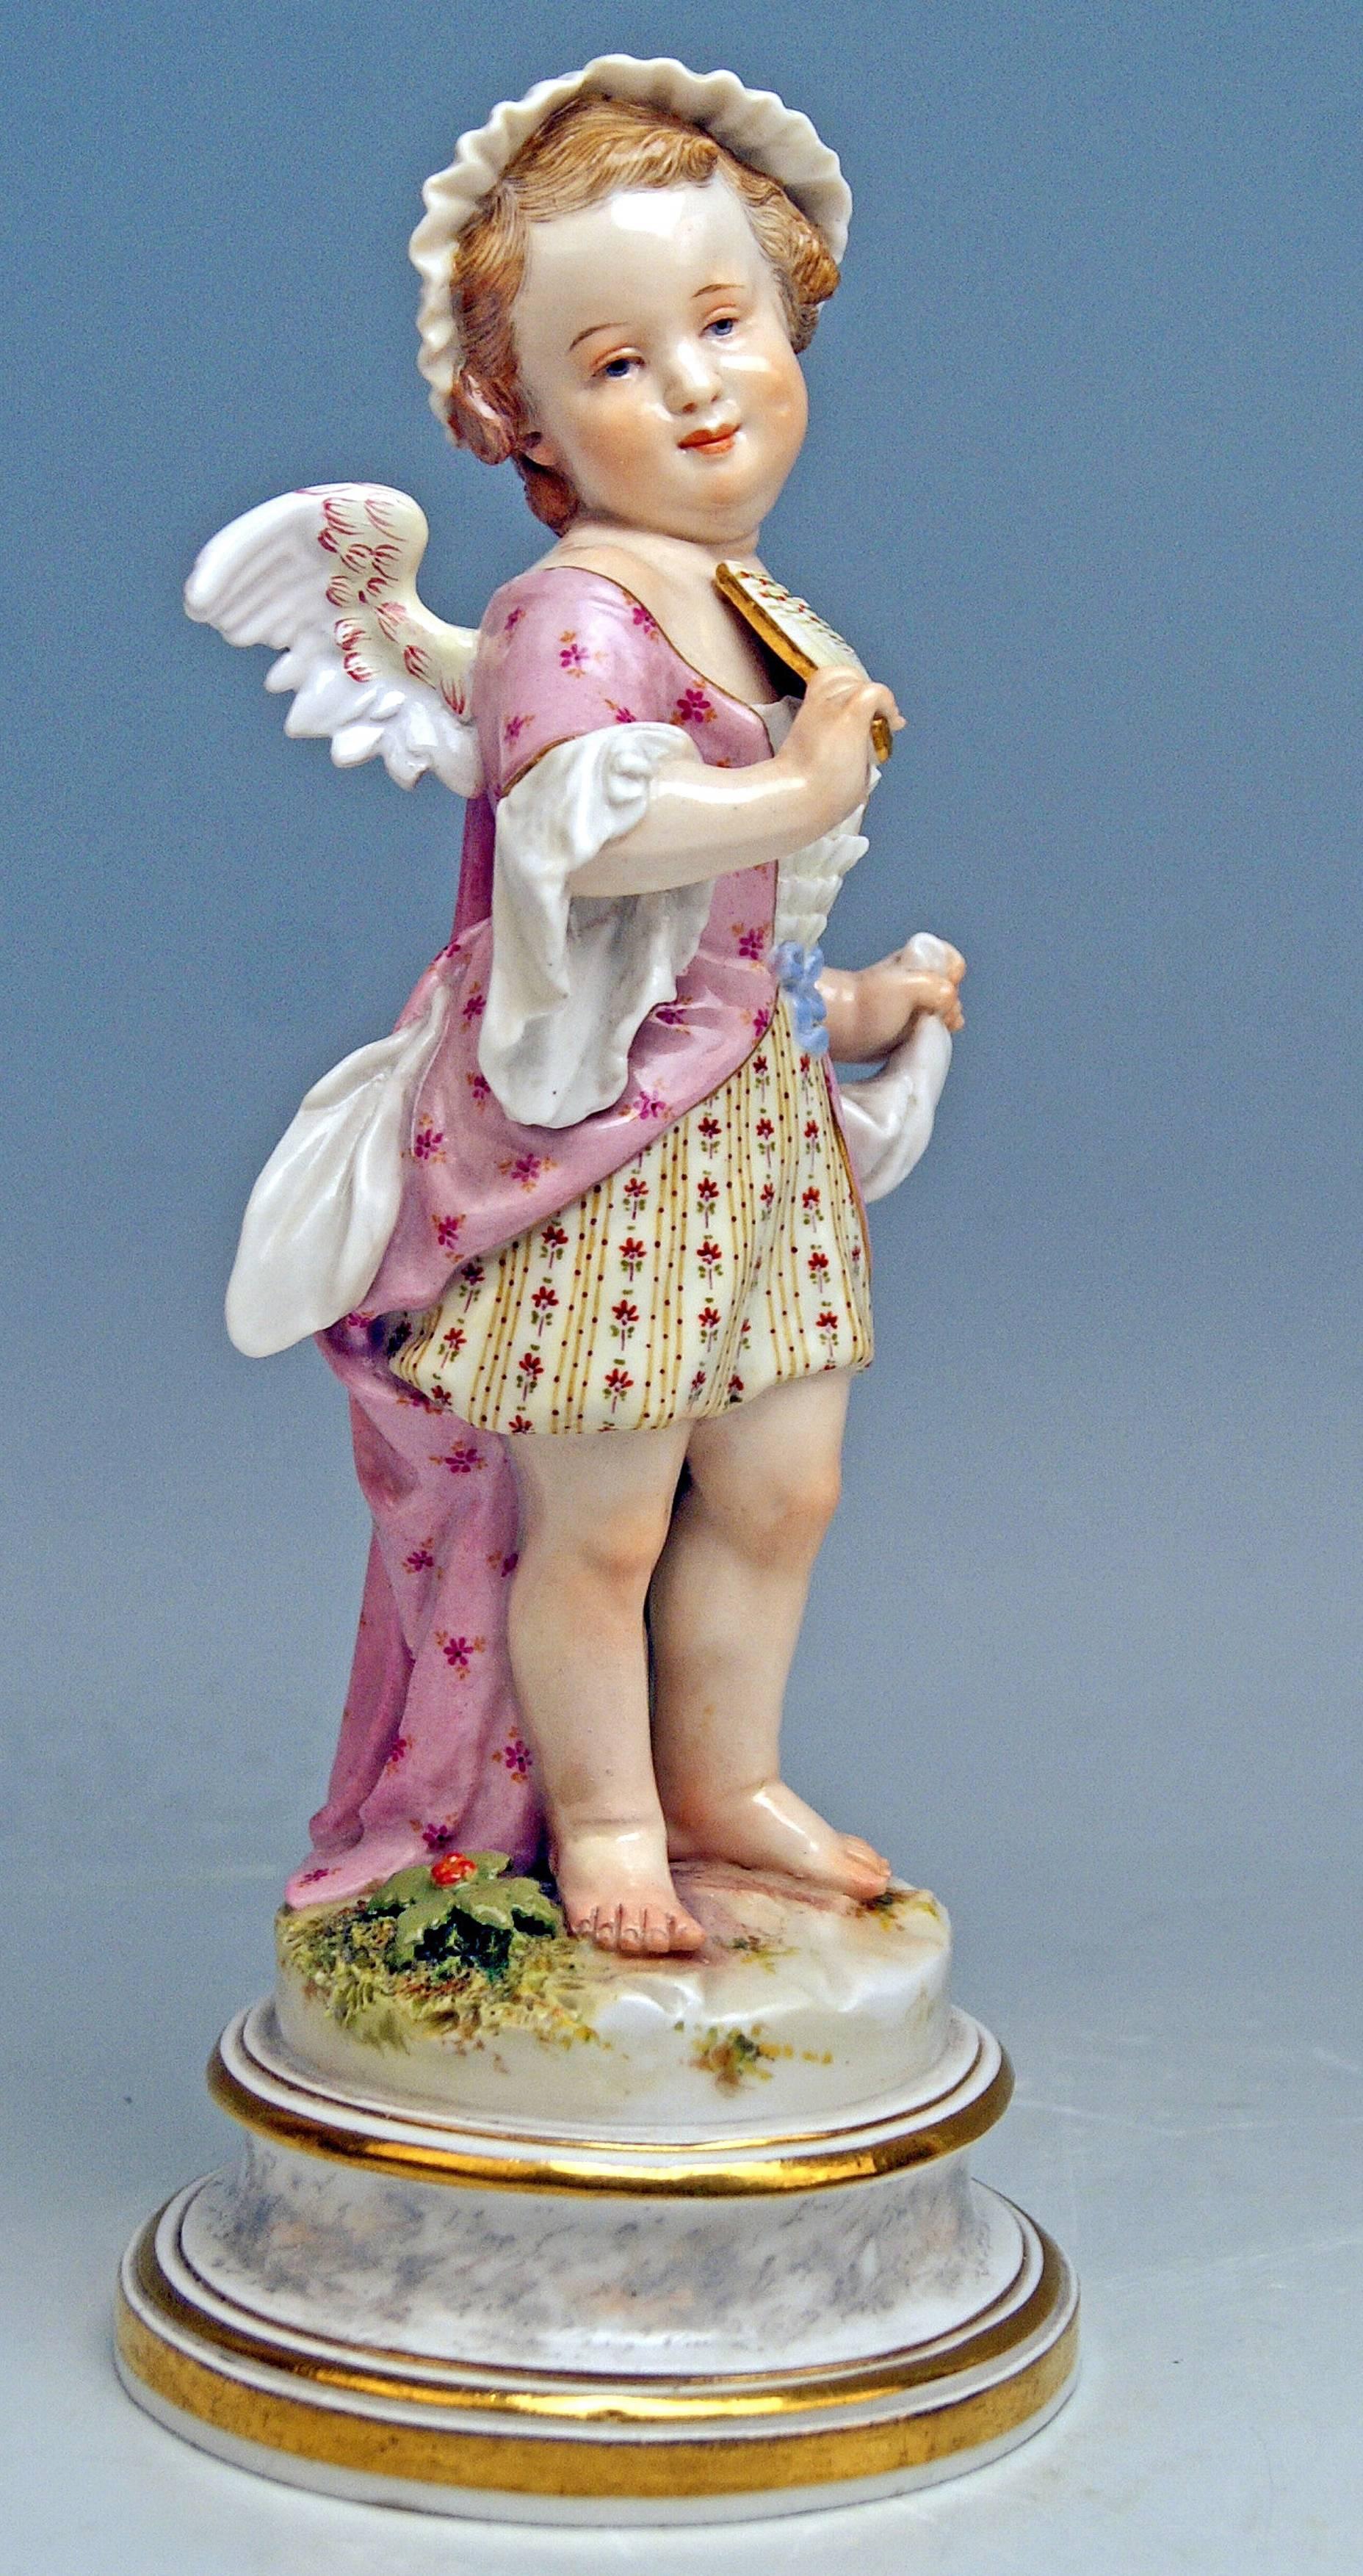 Meissen Most Lovely Figurine of Famous L-series: Cherub disguised as female amour wearing a fan ('Coquette')

Measures:
height: 8.66 inches 
diameter of base: 3.74 inches

Manufactory: Meissen
Hallmarked: Blue Meissen Sword Mark (glazed